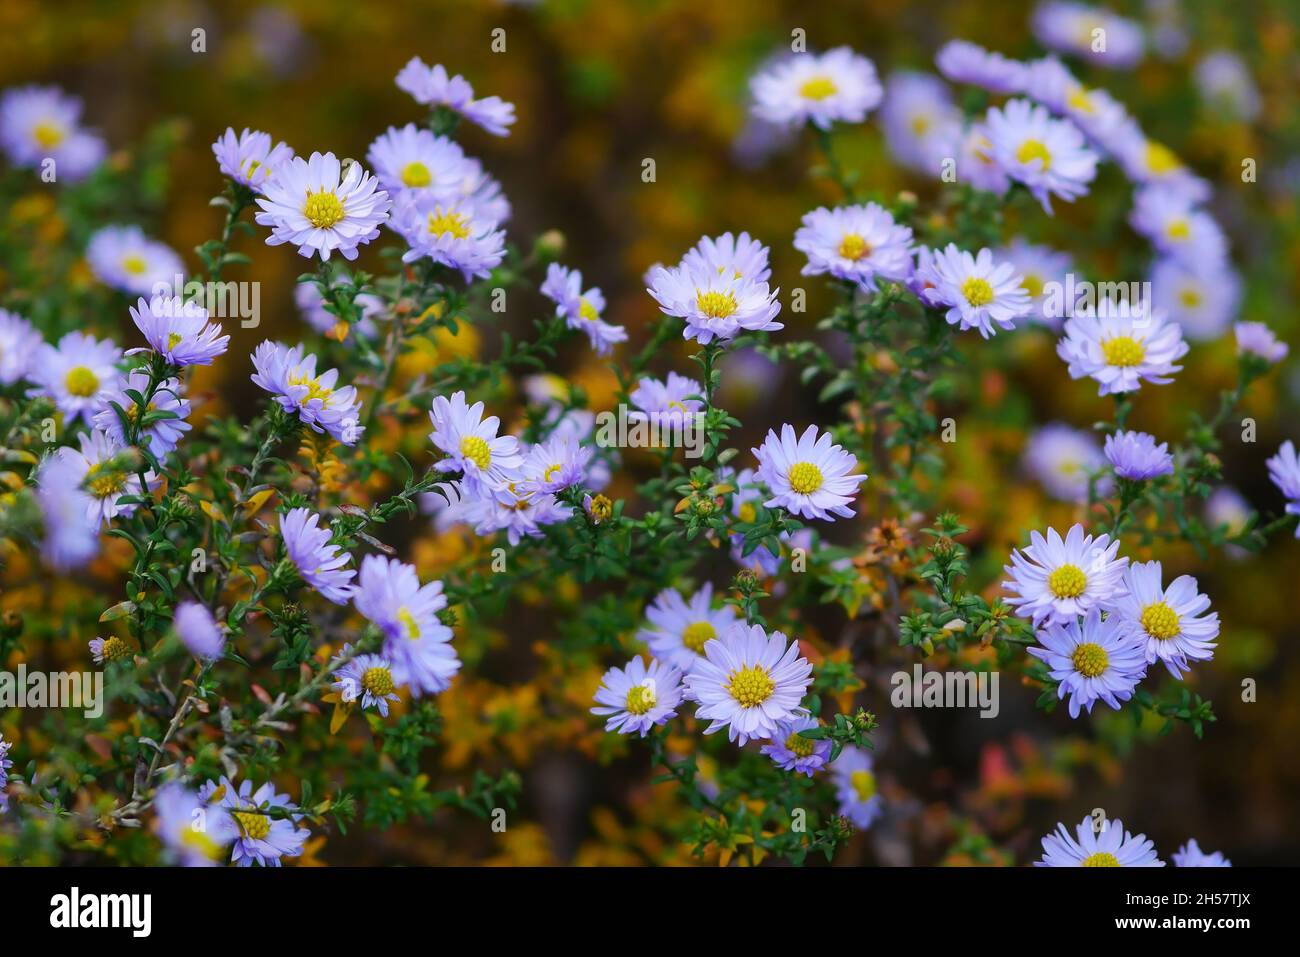 The blossoming New york aster bush in the fall. Aster American (Aster novi-belgii). Symphyotrichum novi-belgii. Stock Photo